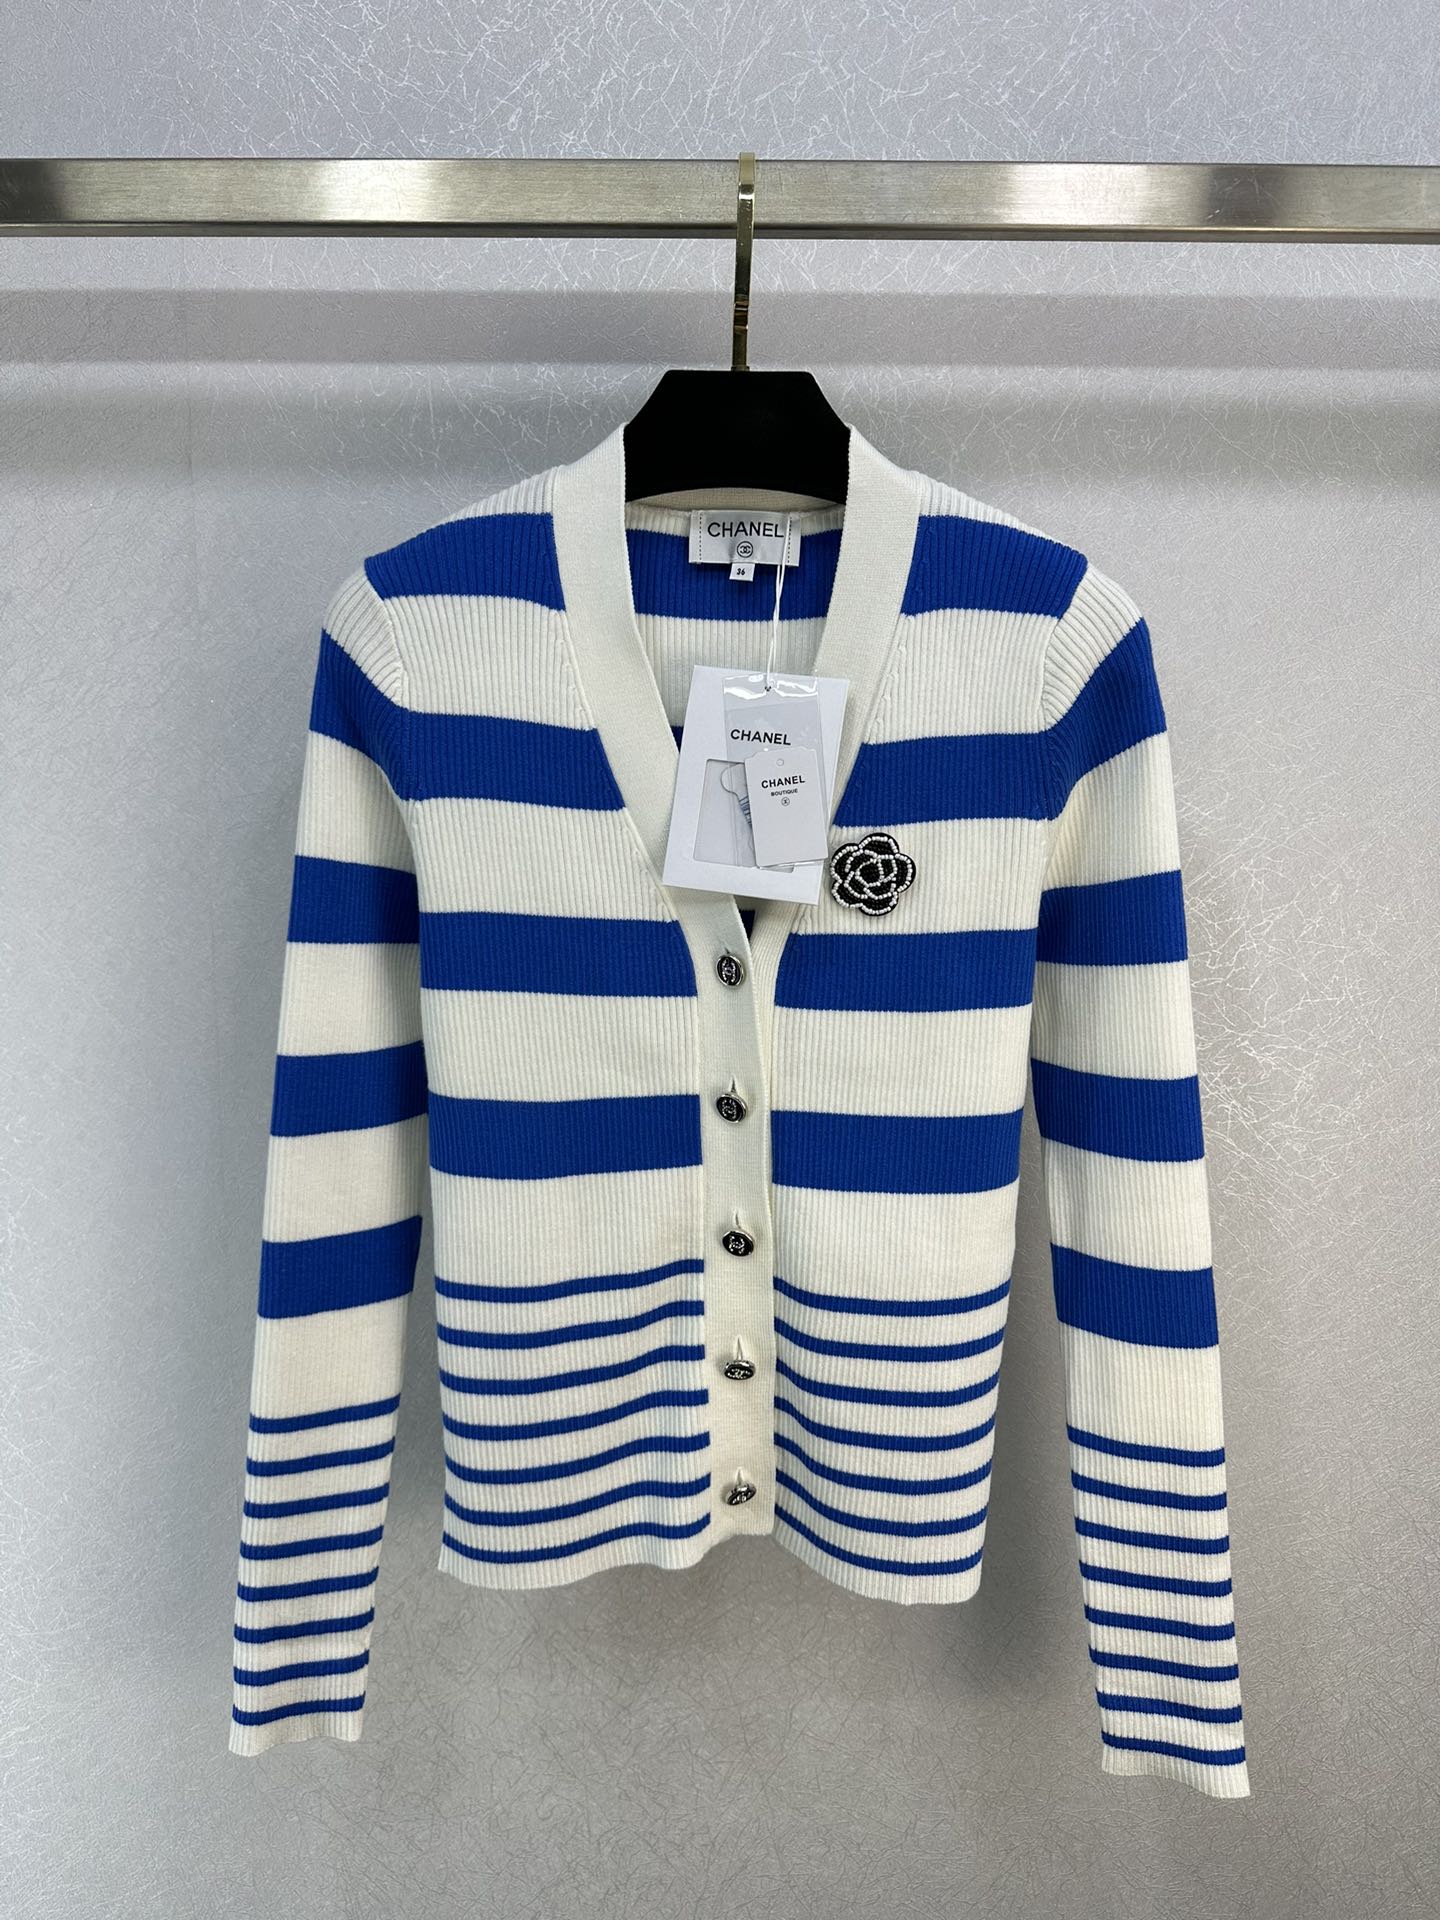 Chanel Clothing Cardigans Knit Sweater 1:1 Replica
 Knitting